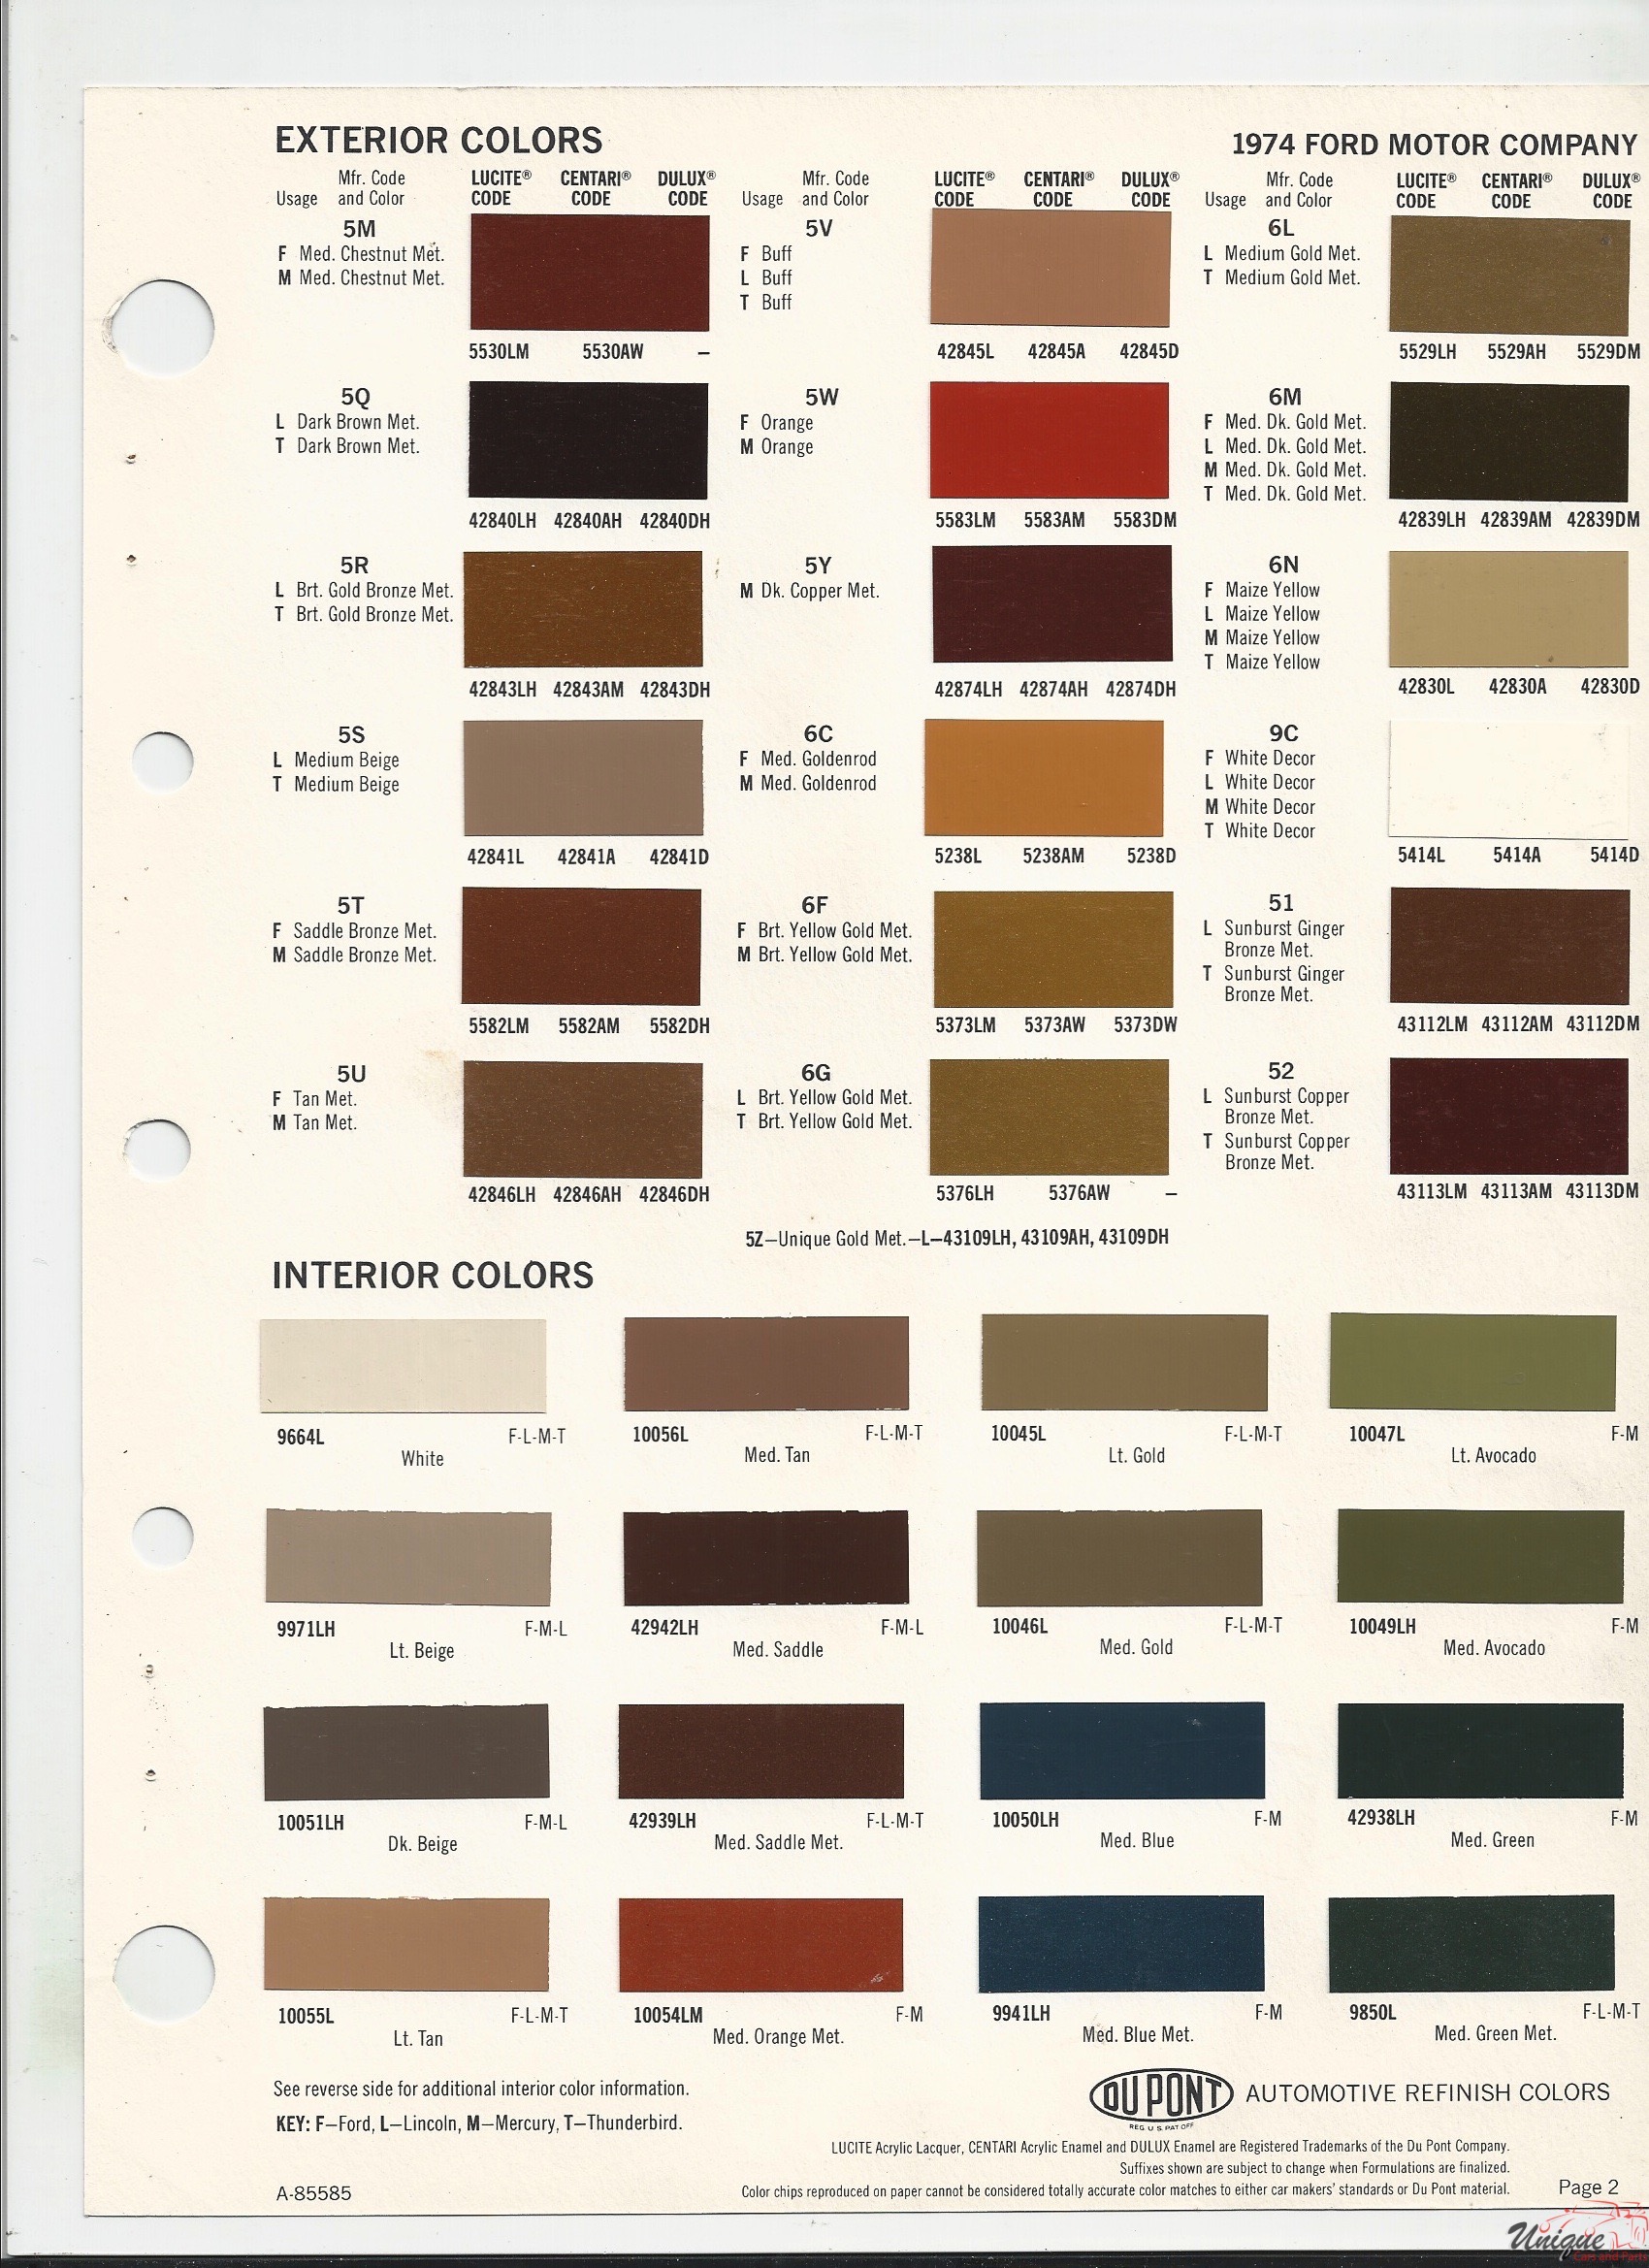 1974 Ford-2 Paint Charts